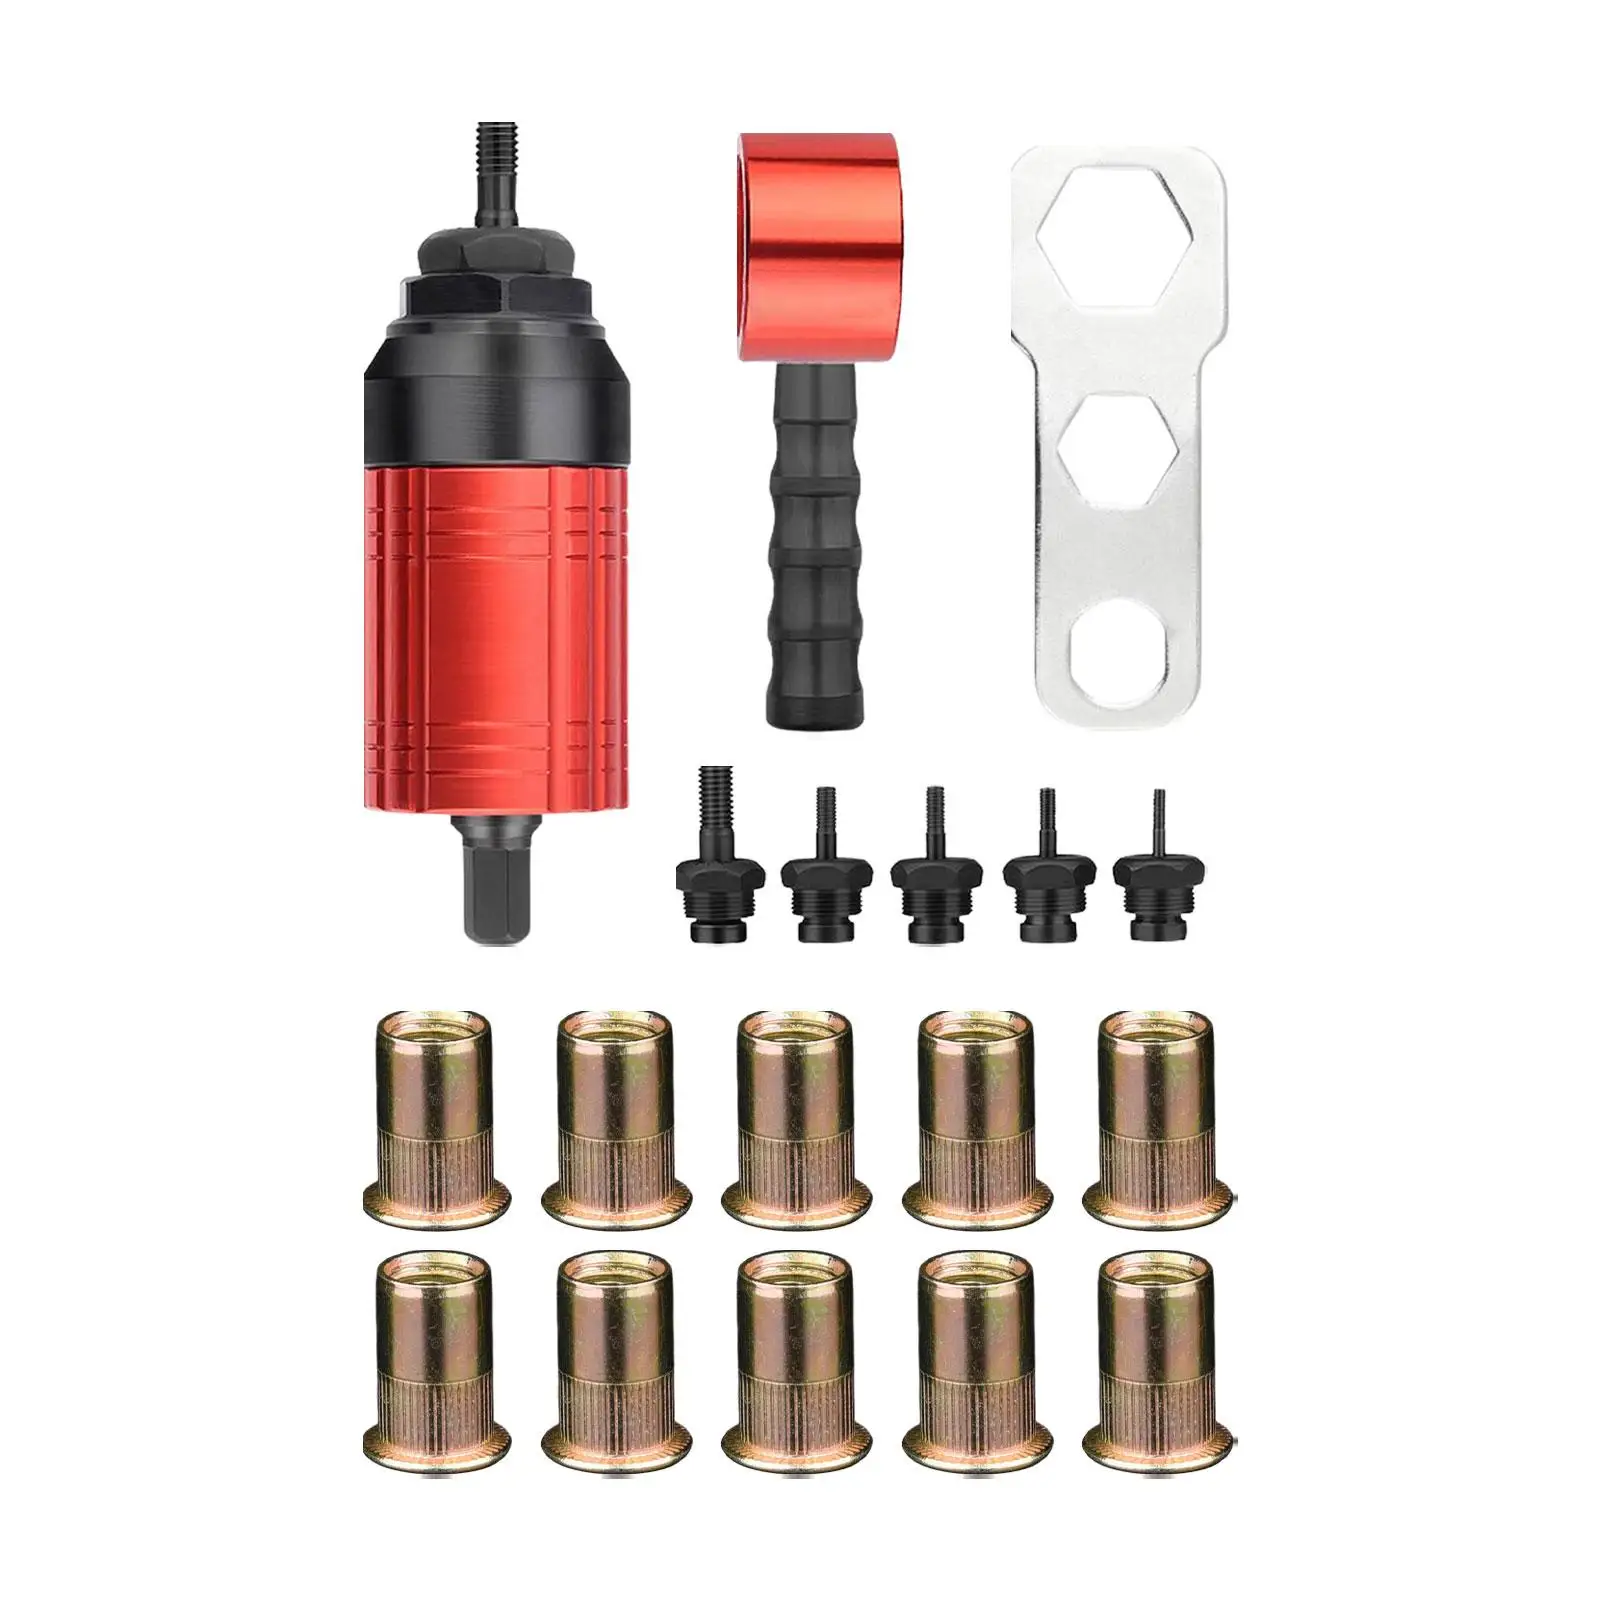 Rivet Nut Drill Adaptor with 10 Rivet Nuts Threaded Insert Installation Tool for Ship Repair Car Electrical Appliance Furniture